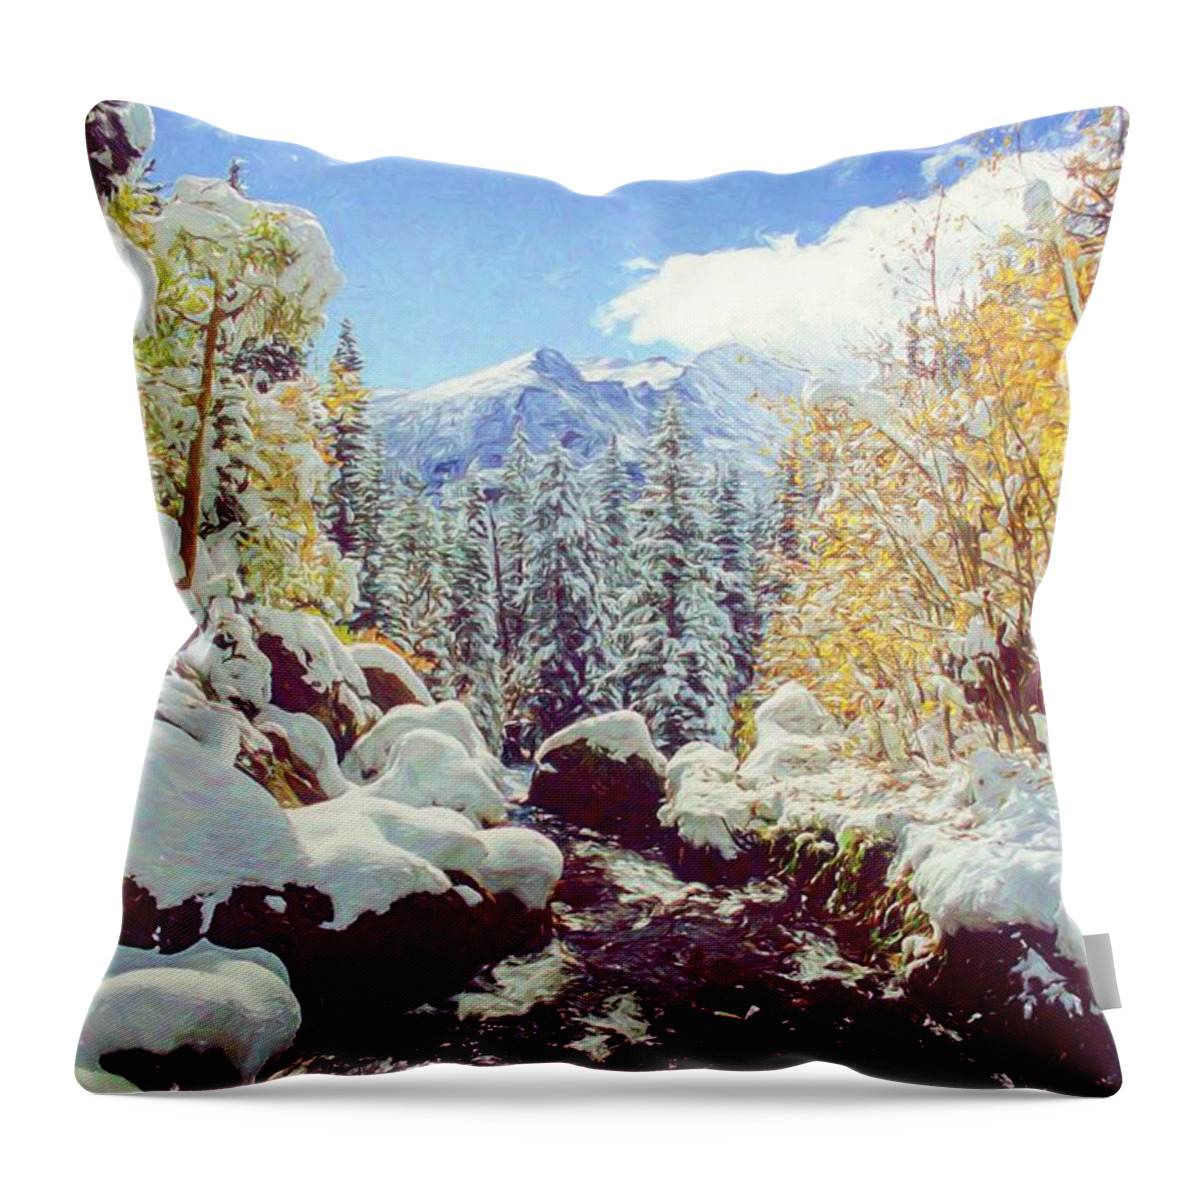 Colorado Throw Pillow featuring the photograph Early Snow by Eric Glaser